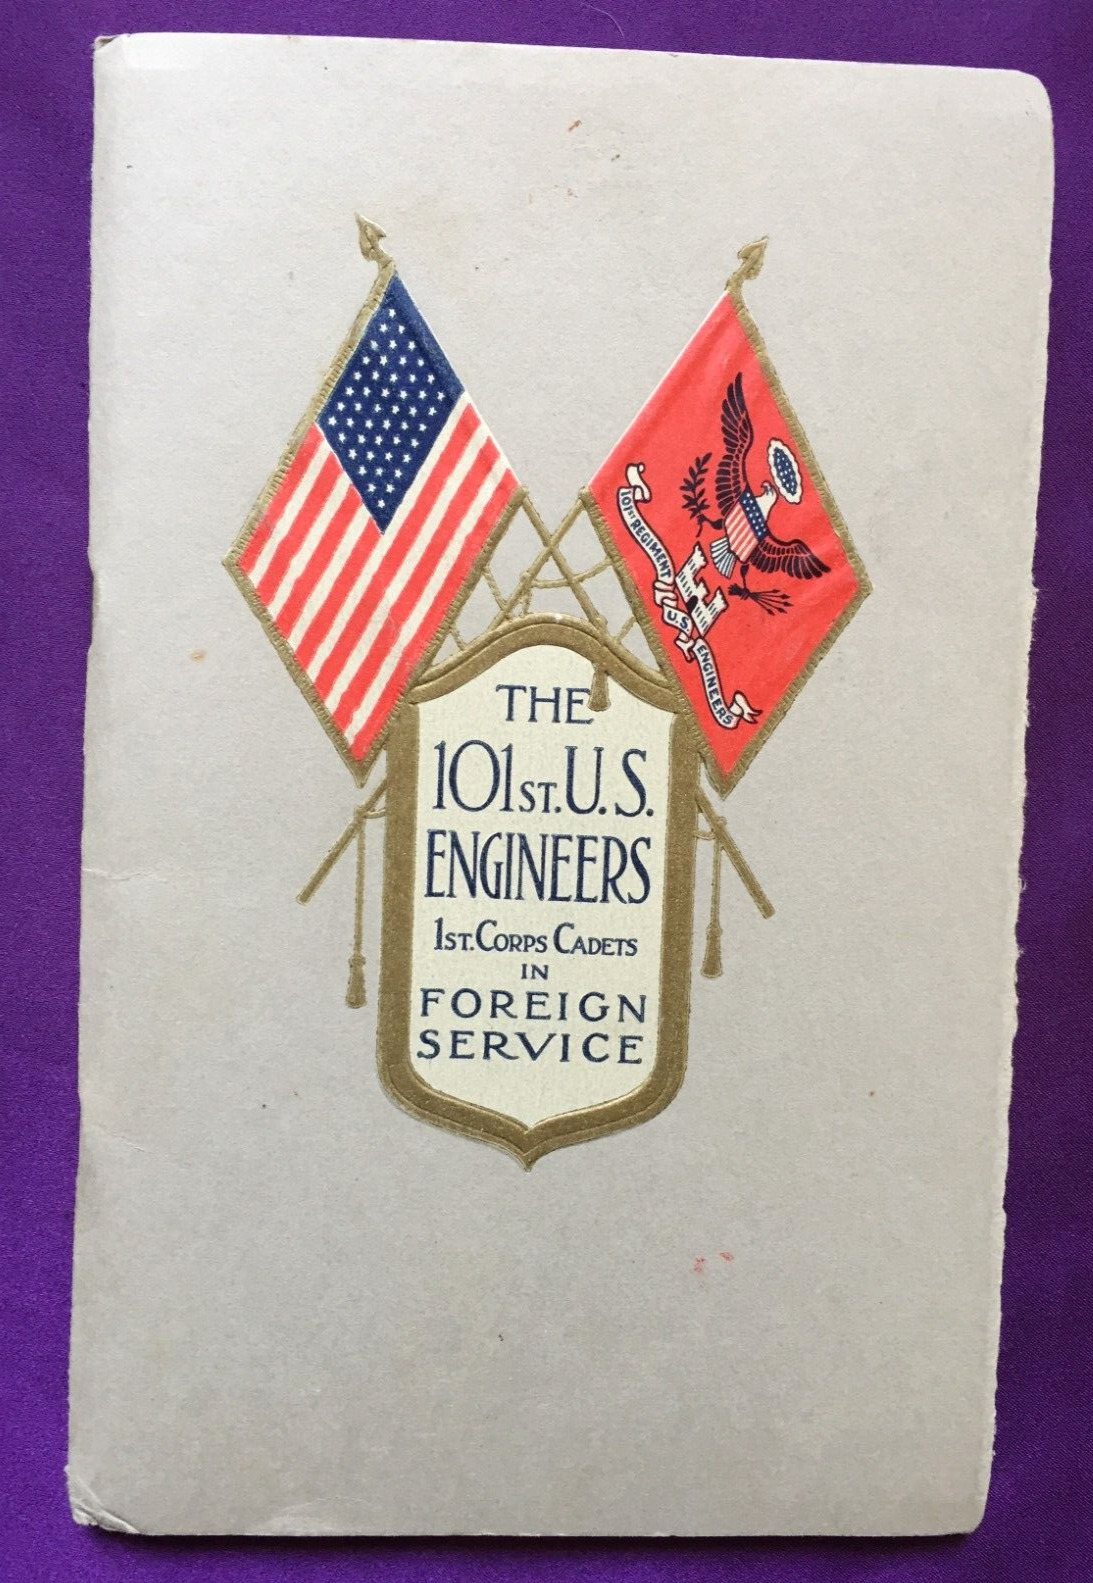 1919 - 101st U.S. ENGINEERS (1st Corps Cadets) IN FOREIGN SERVICE - WWI, Rare